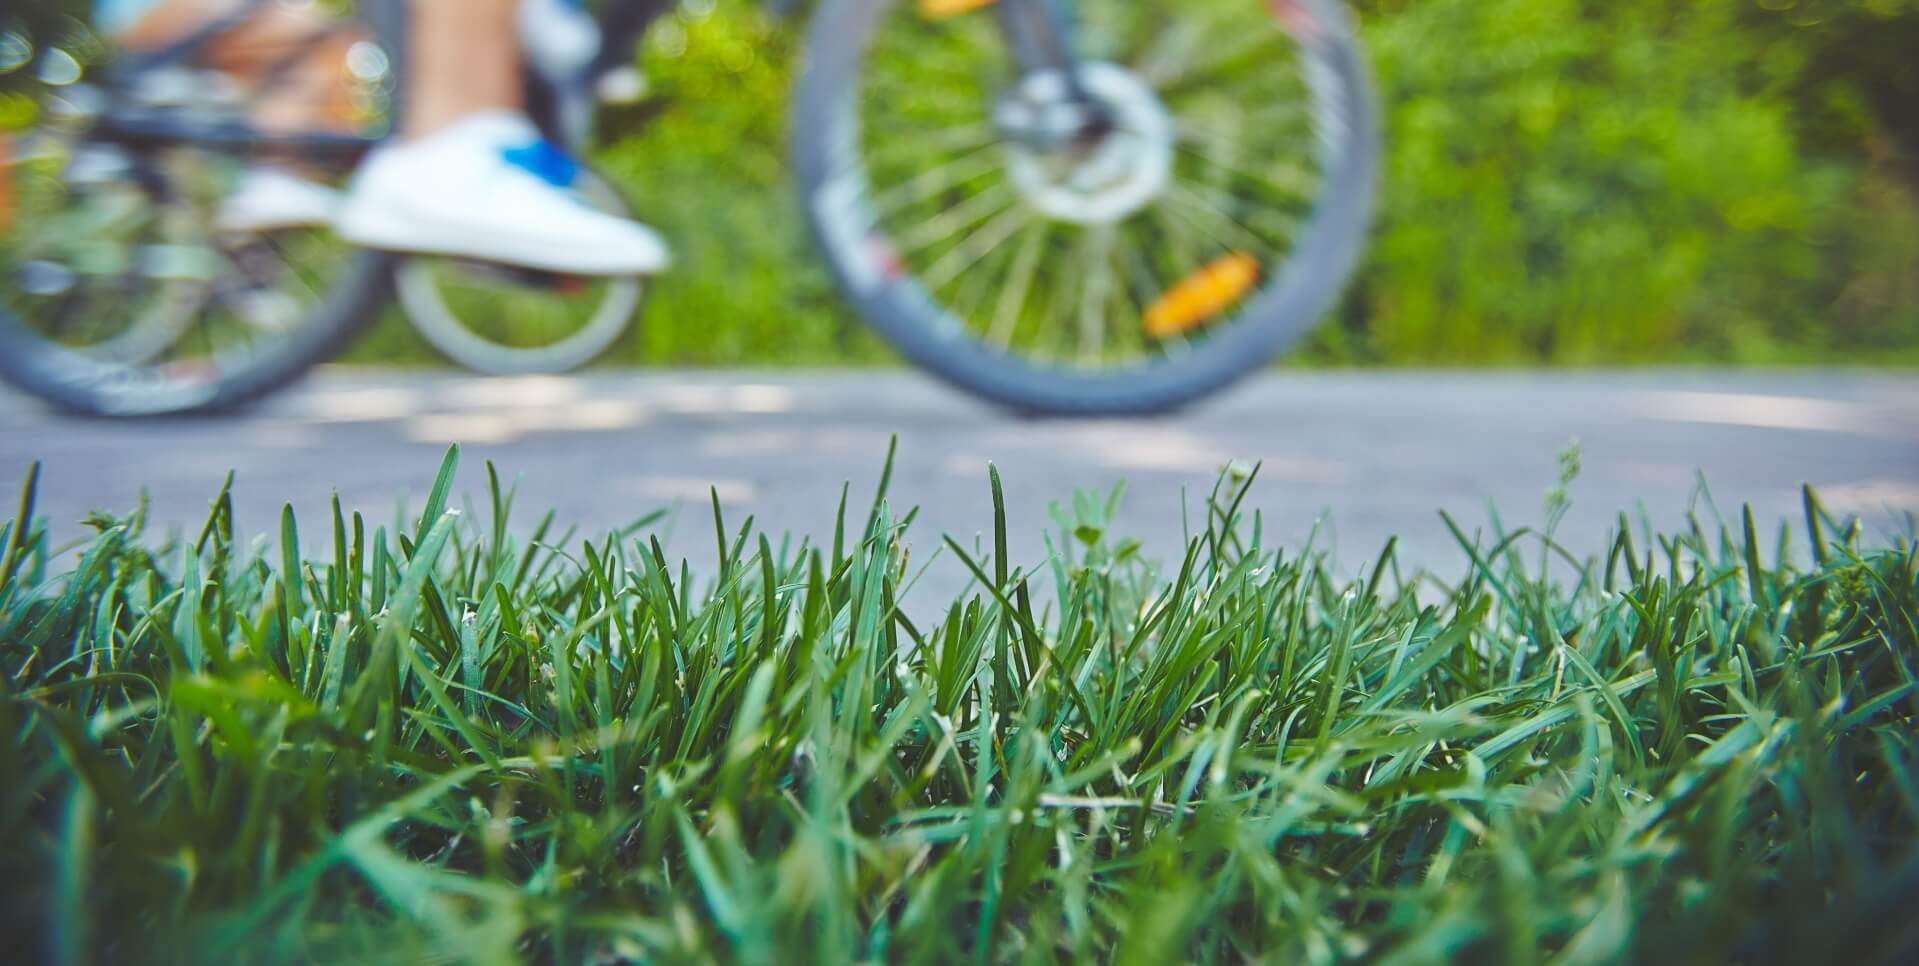 green-grass-on-the-lawn-and-human-on-bicycle-on-background-SBI-306006792 (1) (1)